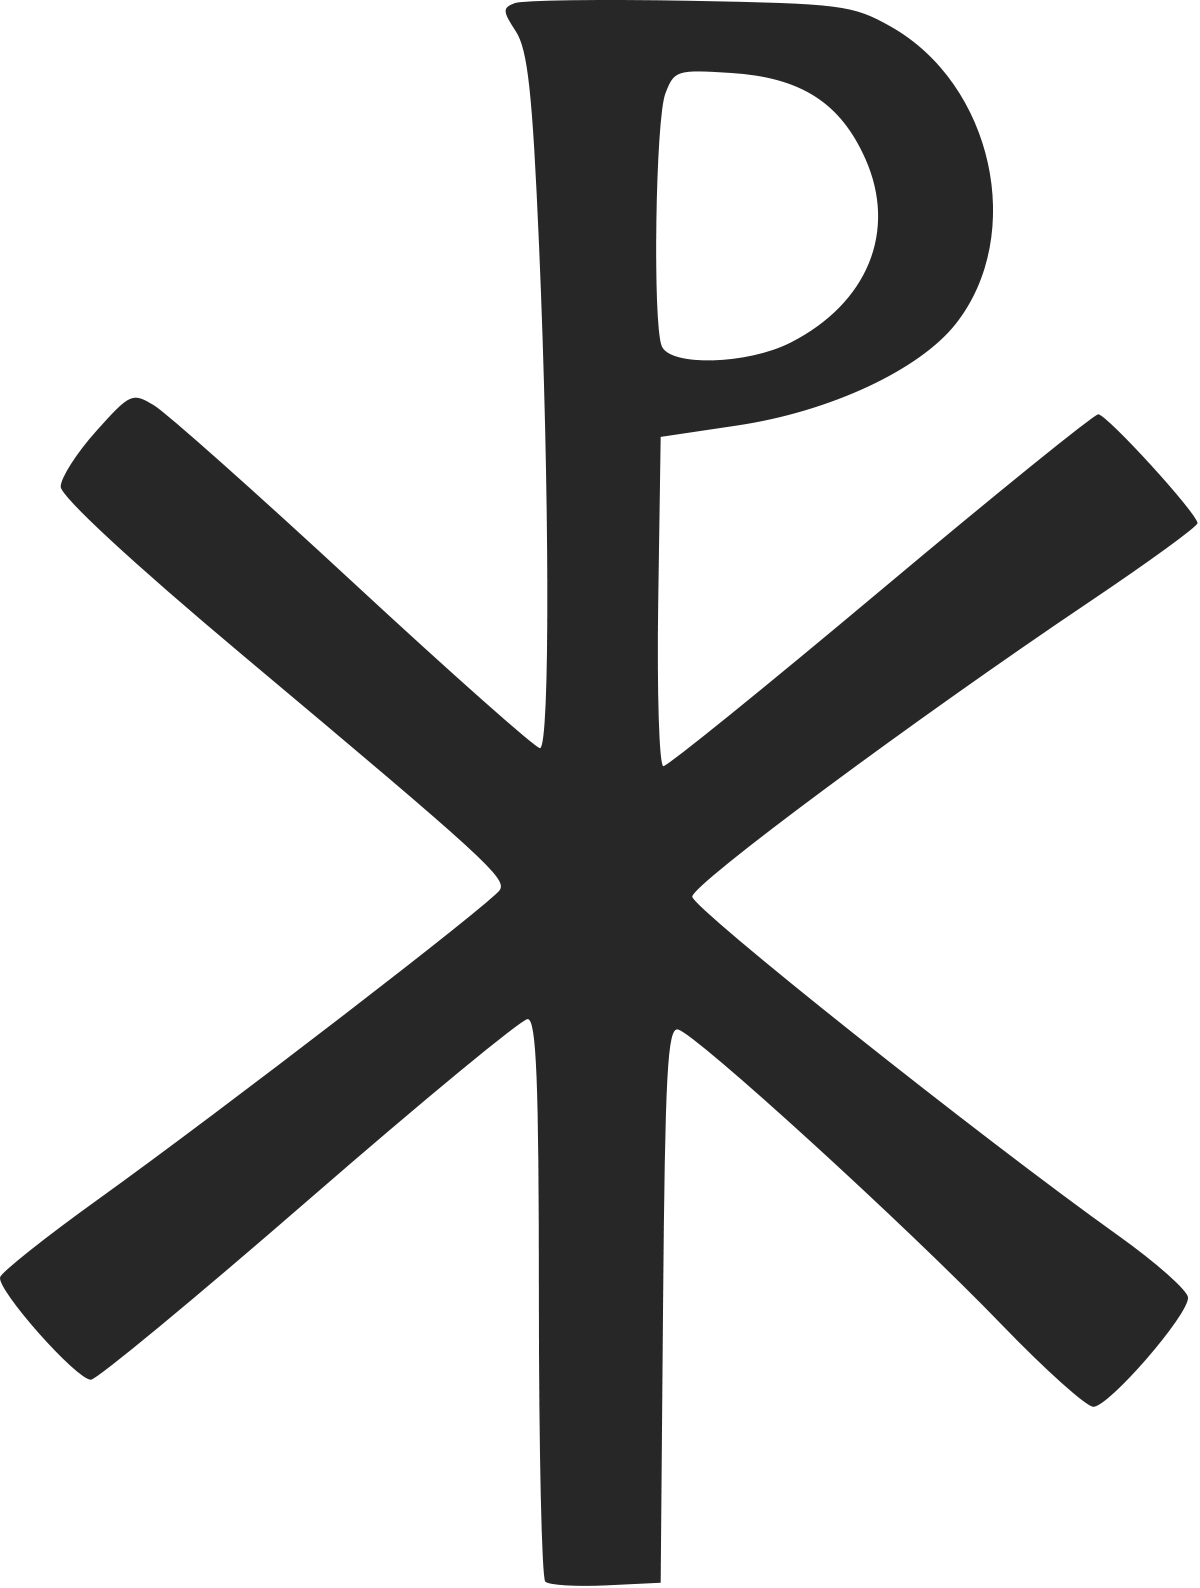 Link: Chi Rho symbol. The Chi Rho /ˈkaɪ ˈroʊ/; also known as